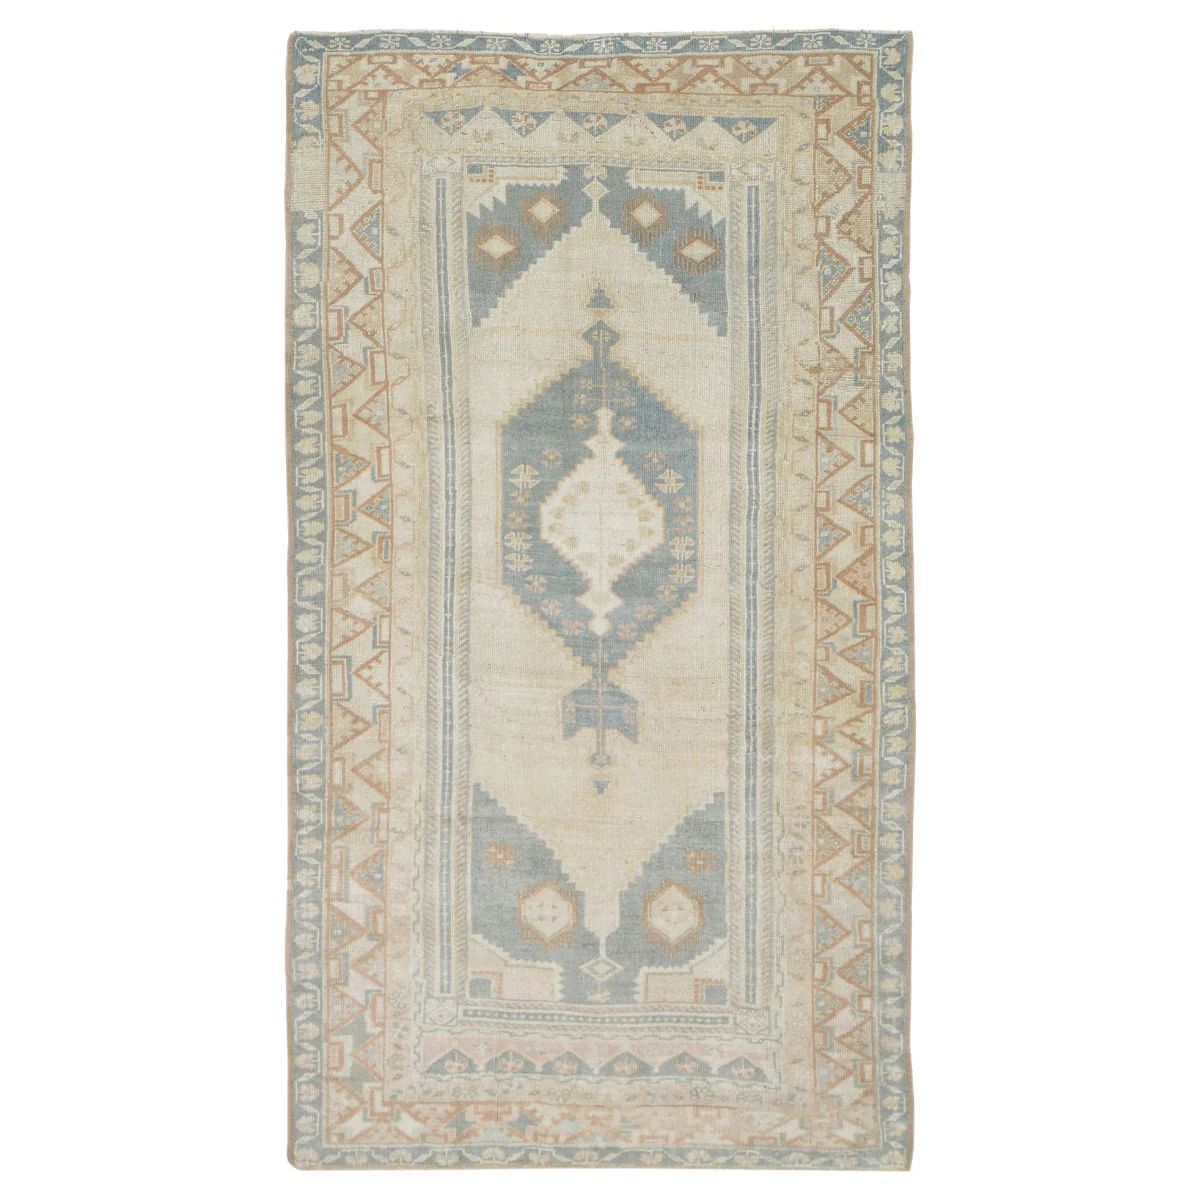 'August' Vintage Rug (5 x 9) | Tuesday Made